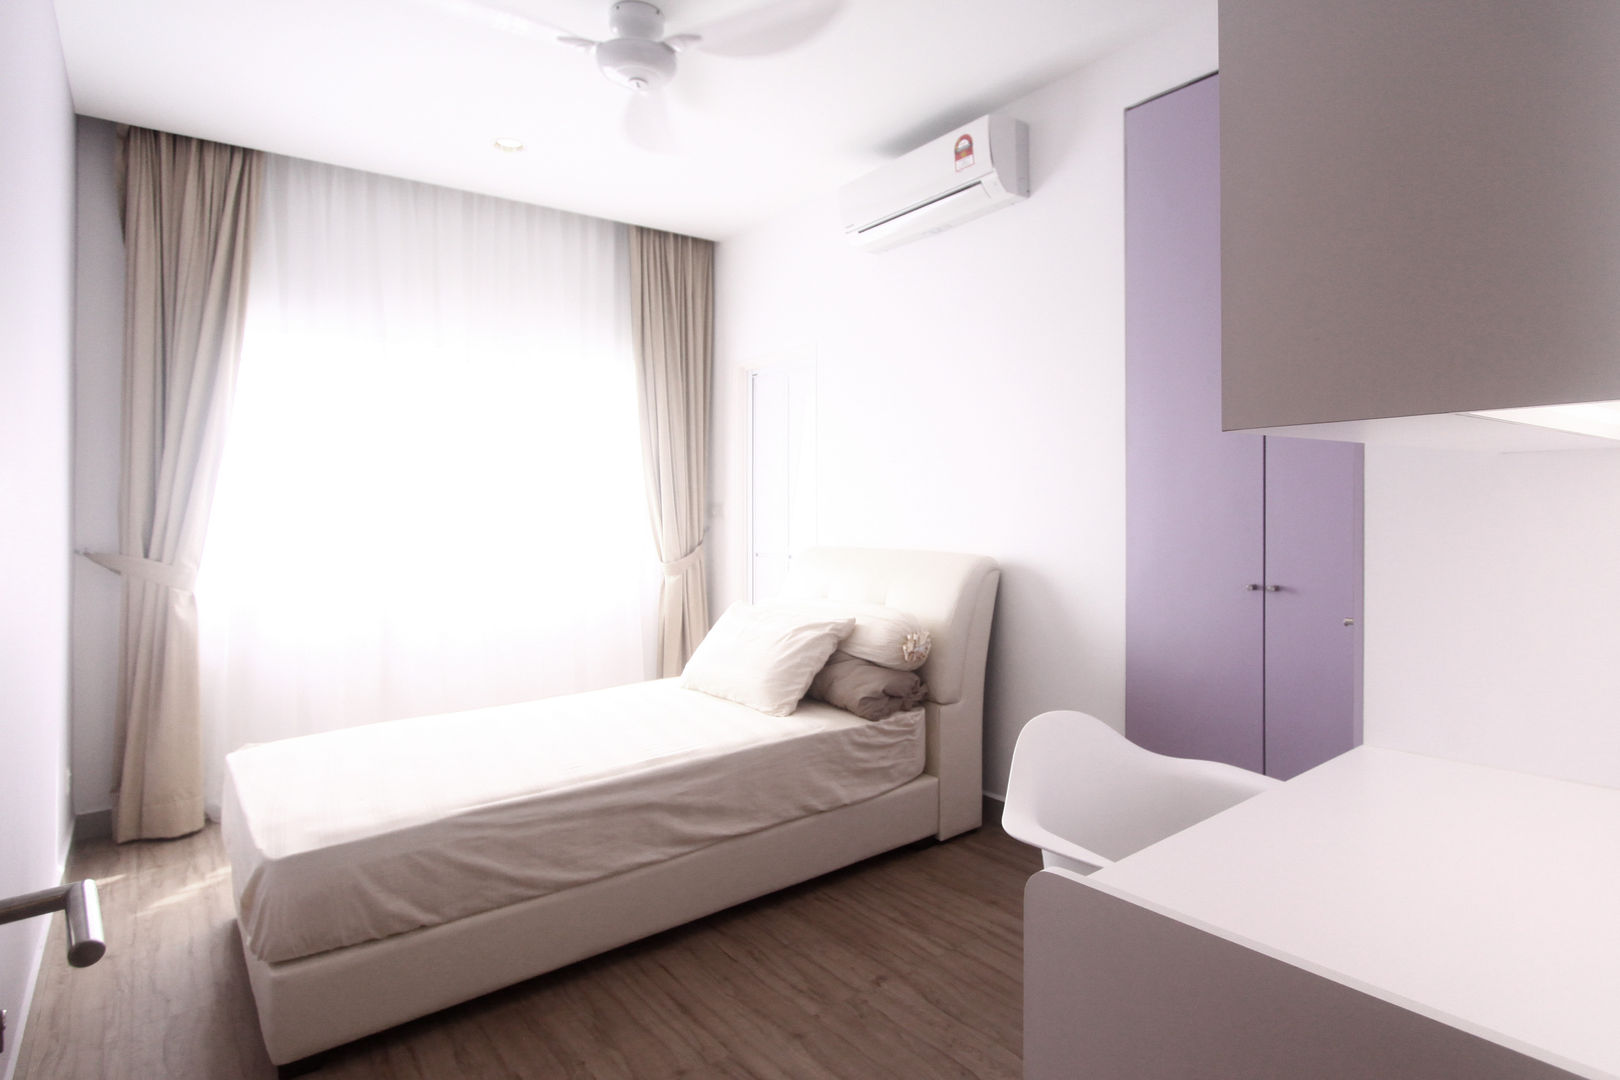 The Sanderson Home, inDfinity Design (M) SDN BHD inDfinity Design (M) SDN BHD Chambre moderne